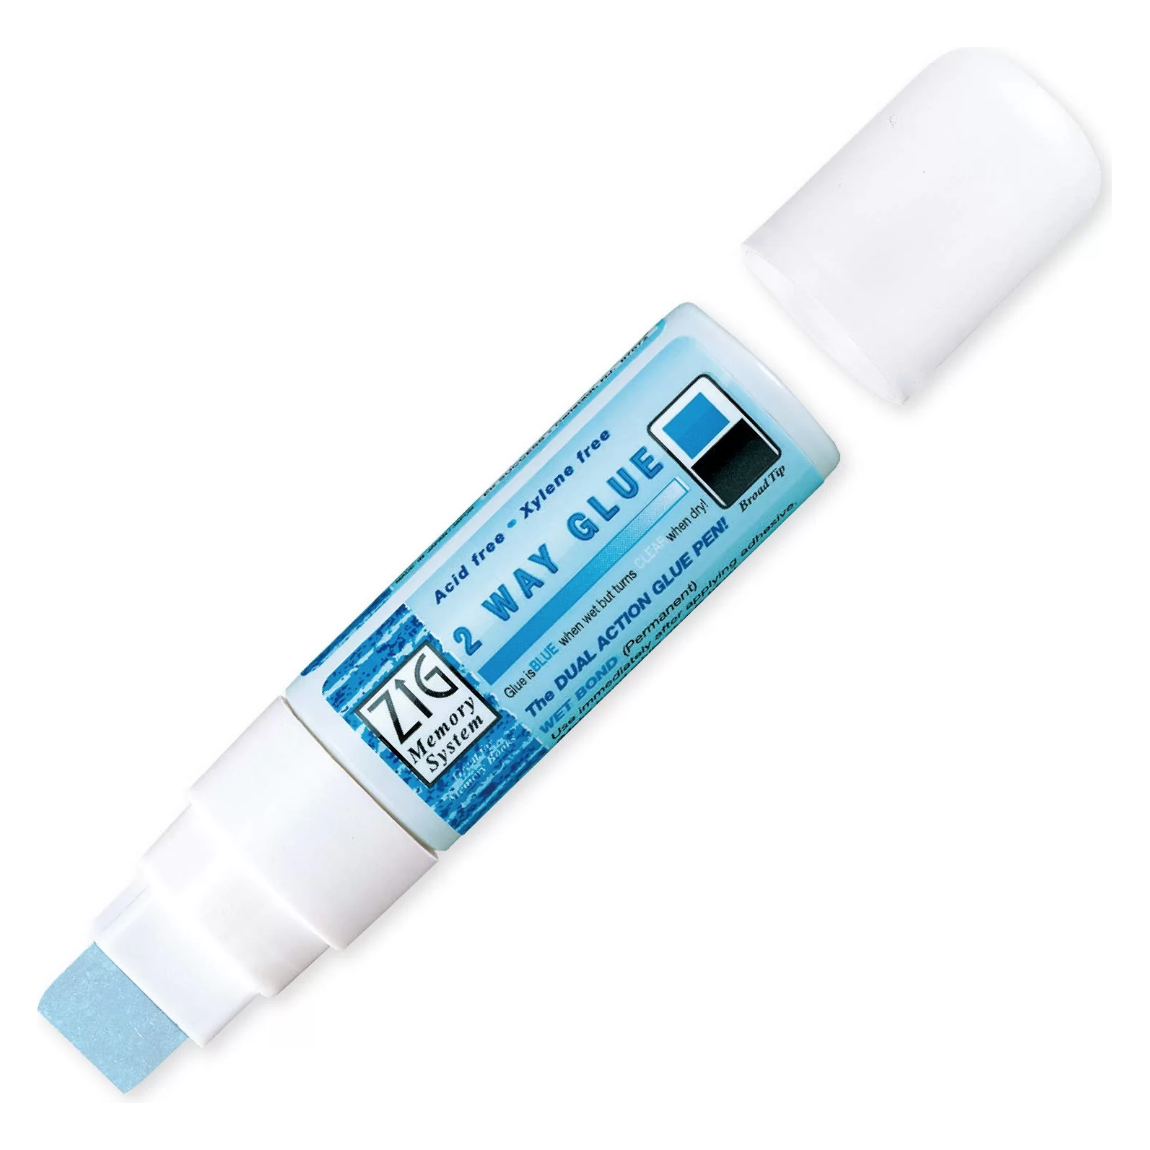 Helmar Fabric Glue Clear 50ml (road freight only, no express post)